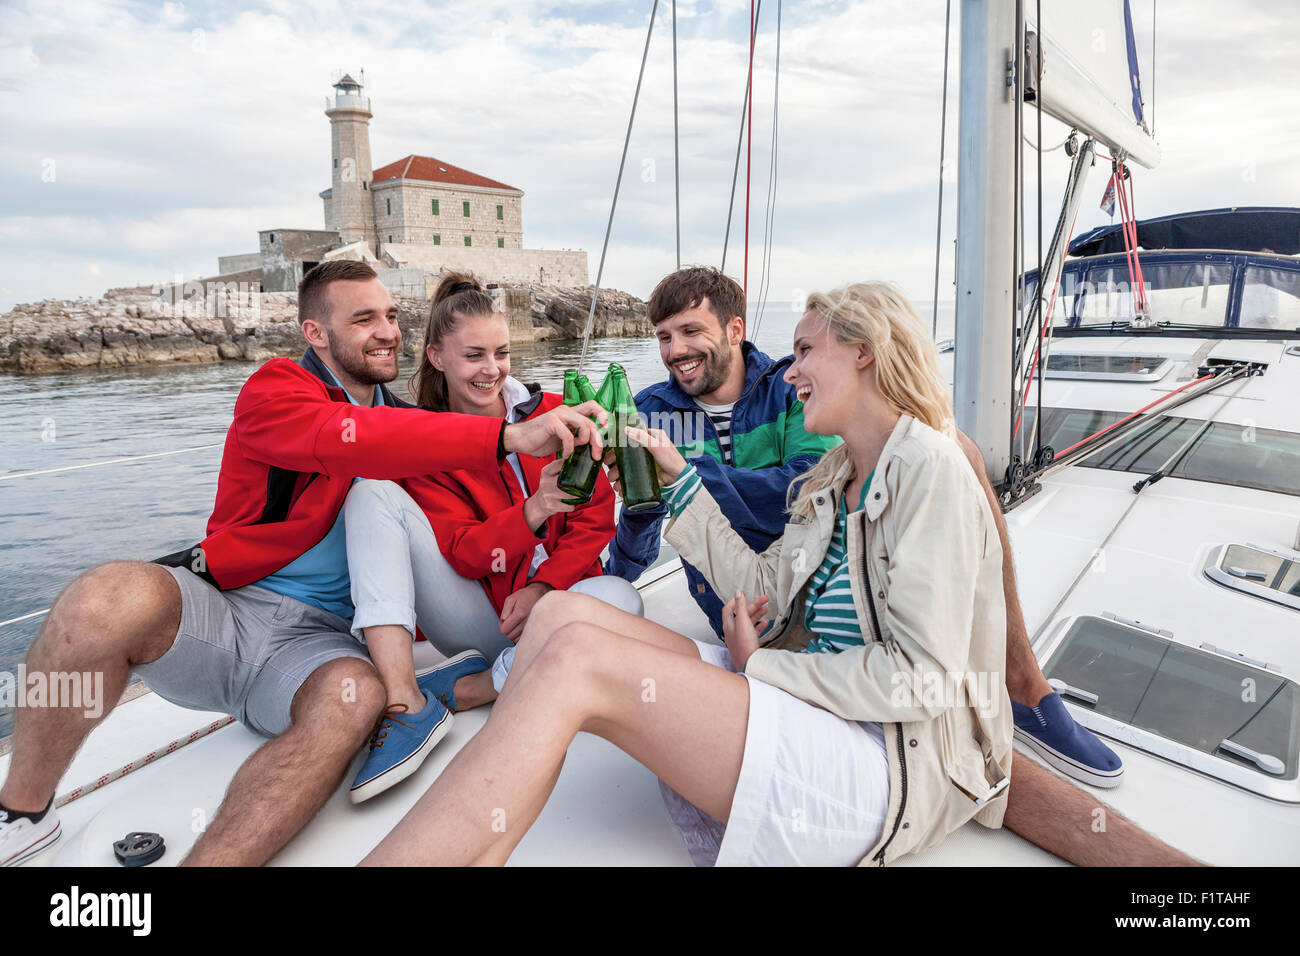 Group of friends drinking beer on sailboat, Adriatic Sea Stock Photo